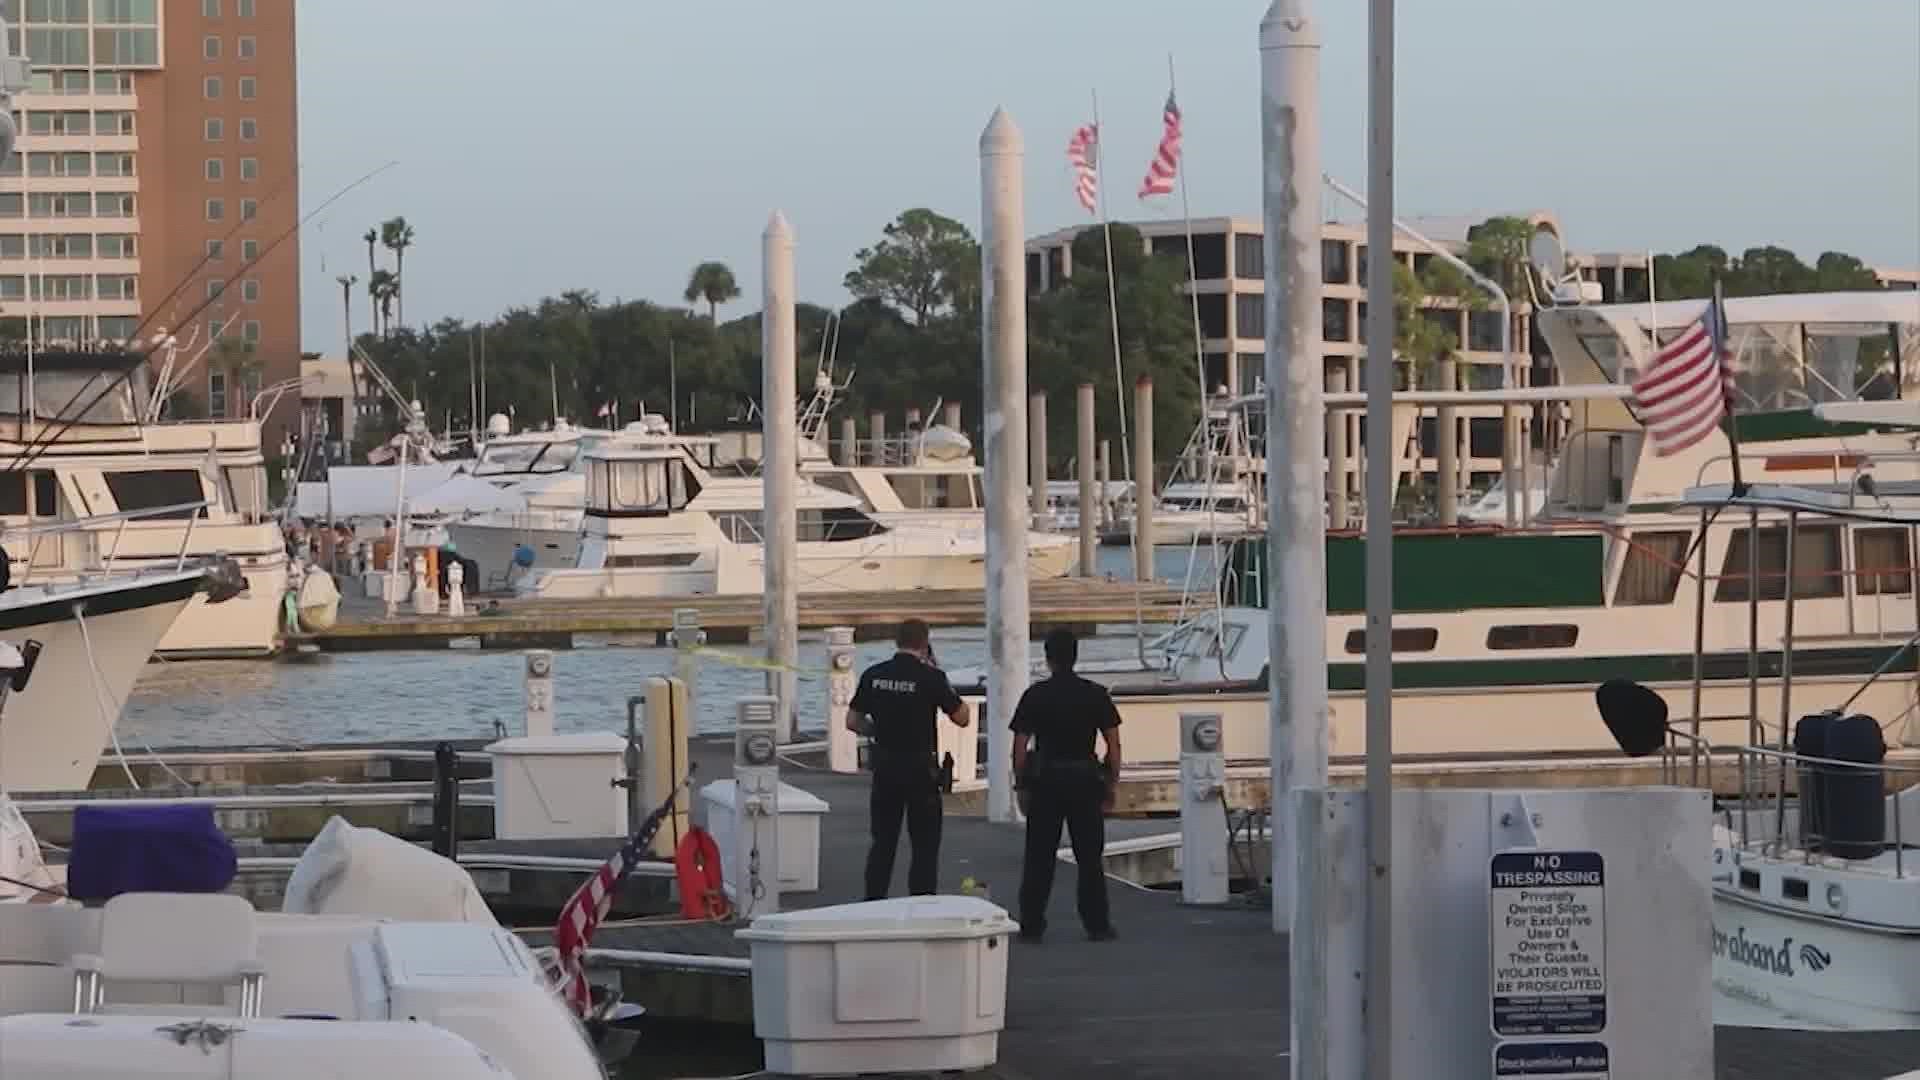 Texas Parks and Wildlife is investigating after a woman was injured in a fall from a boat Saturday evening on Clear Lake in League City, officials said.